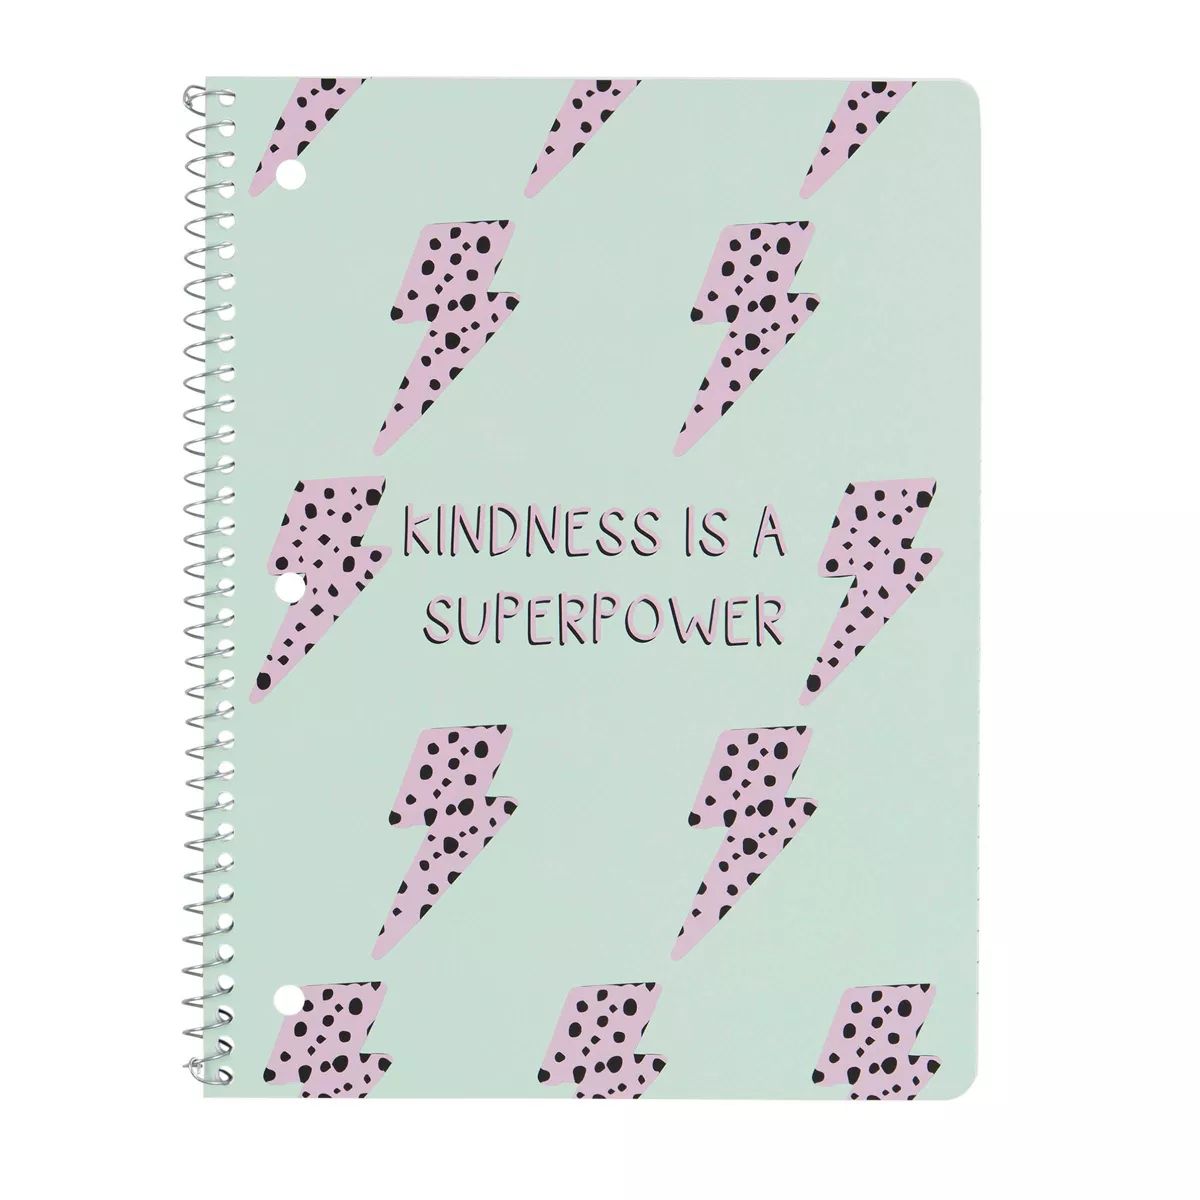 Callie Danielle 160 Pages Wide Ruled Spiral Notebook 10.5"x8" Kindness Is a SuperPower | Target